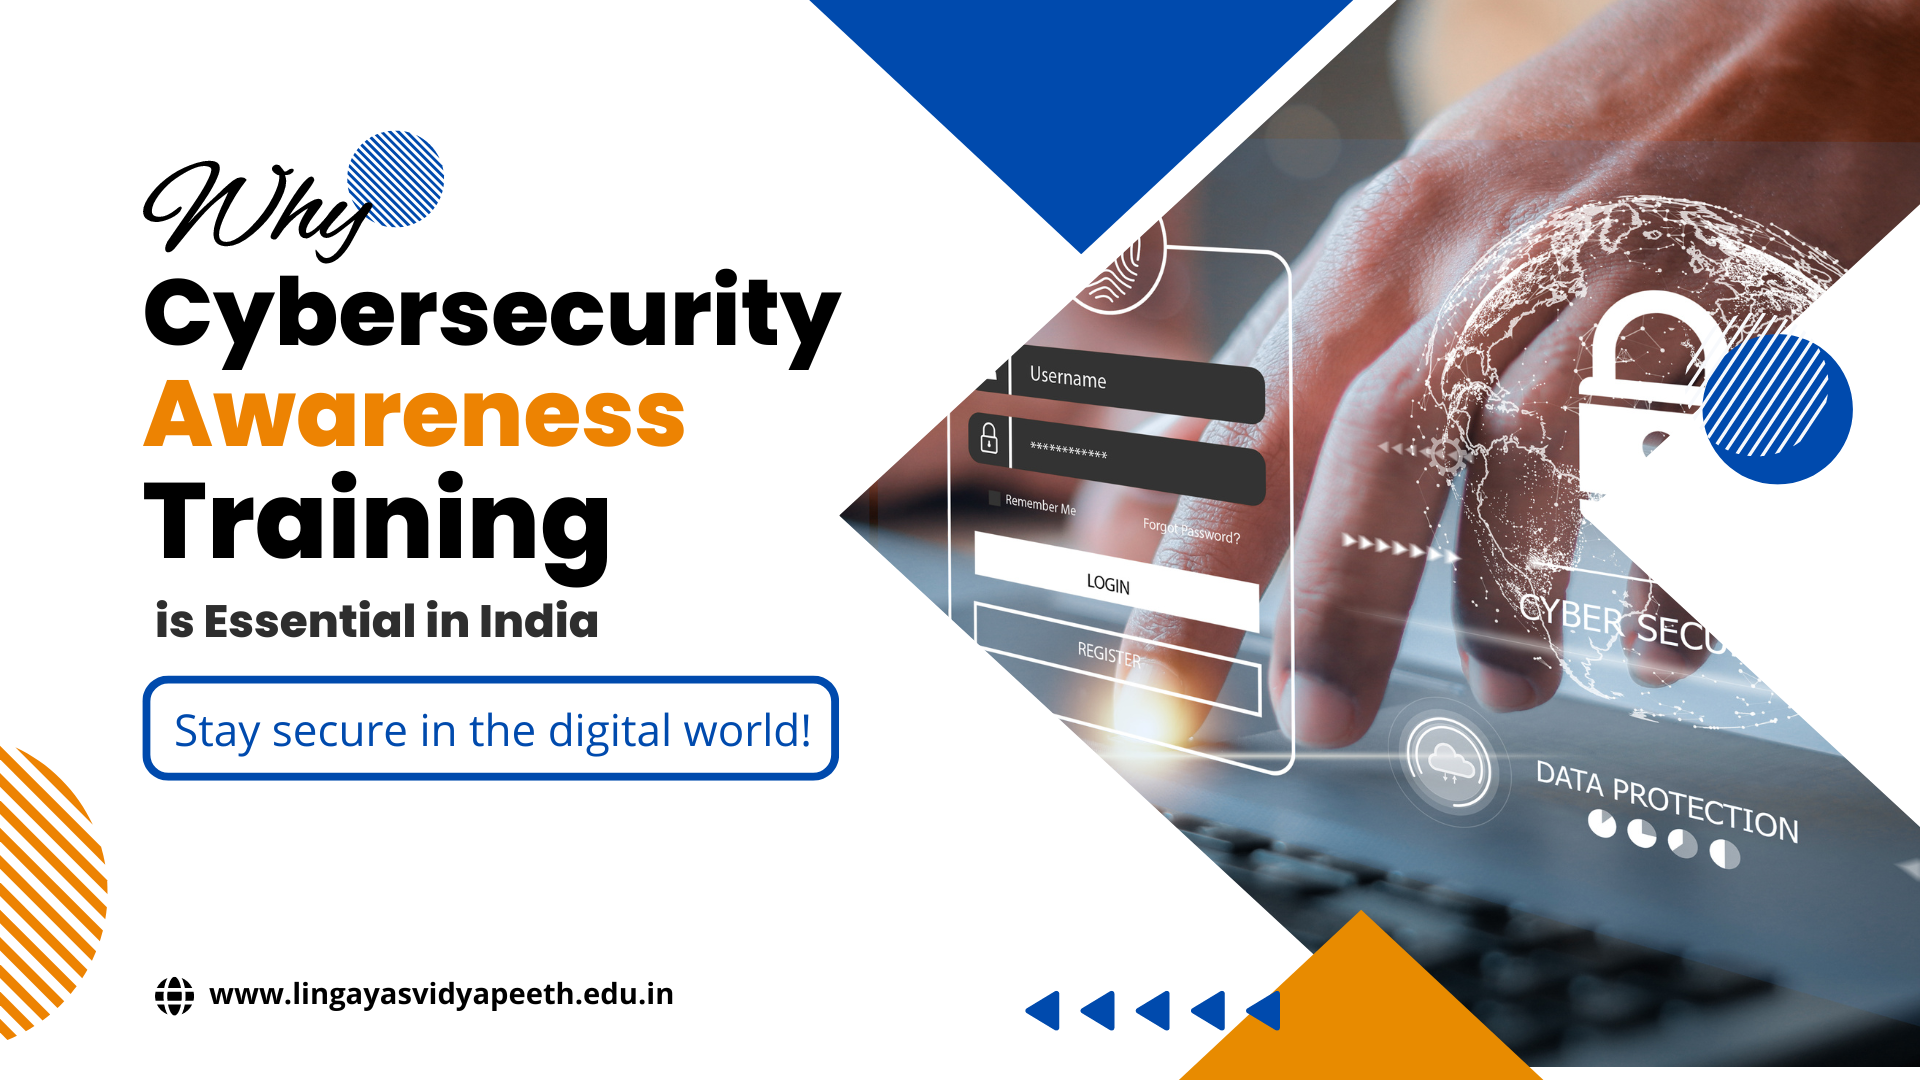 Why Cybersecurity Awareness Training is Essential in India?